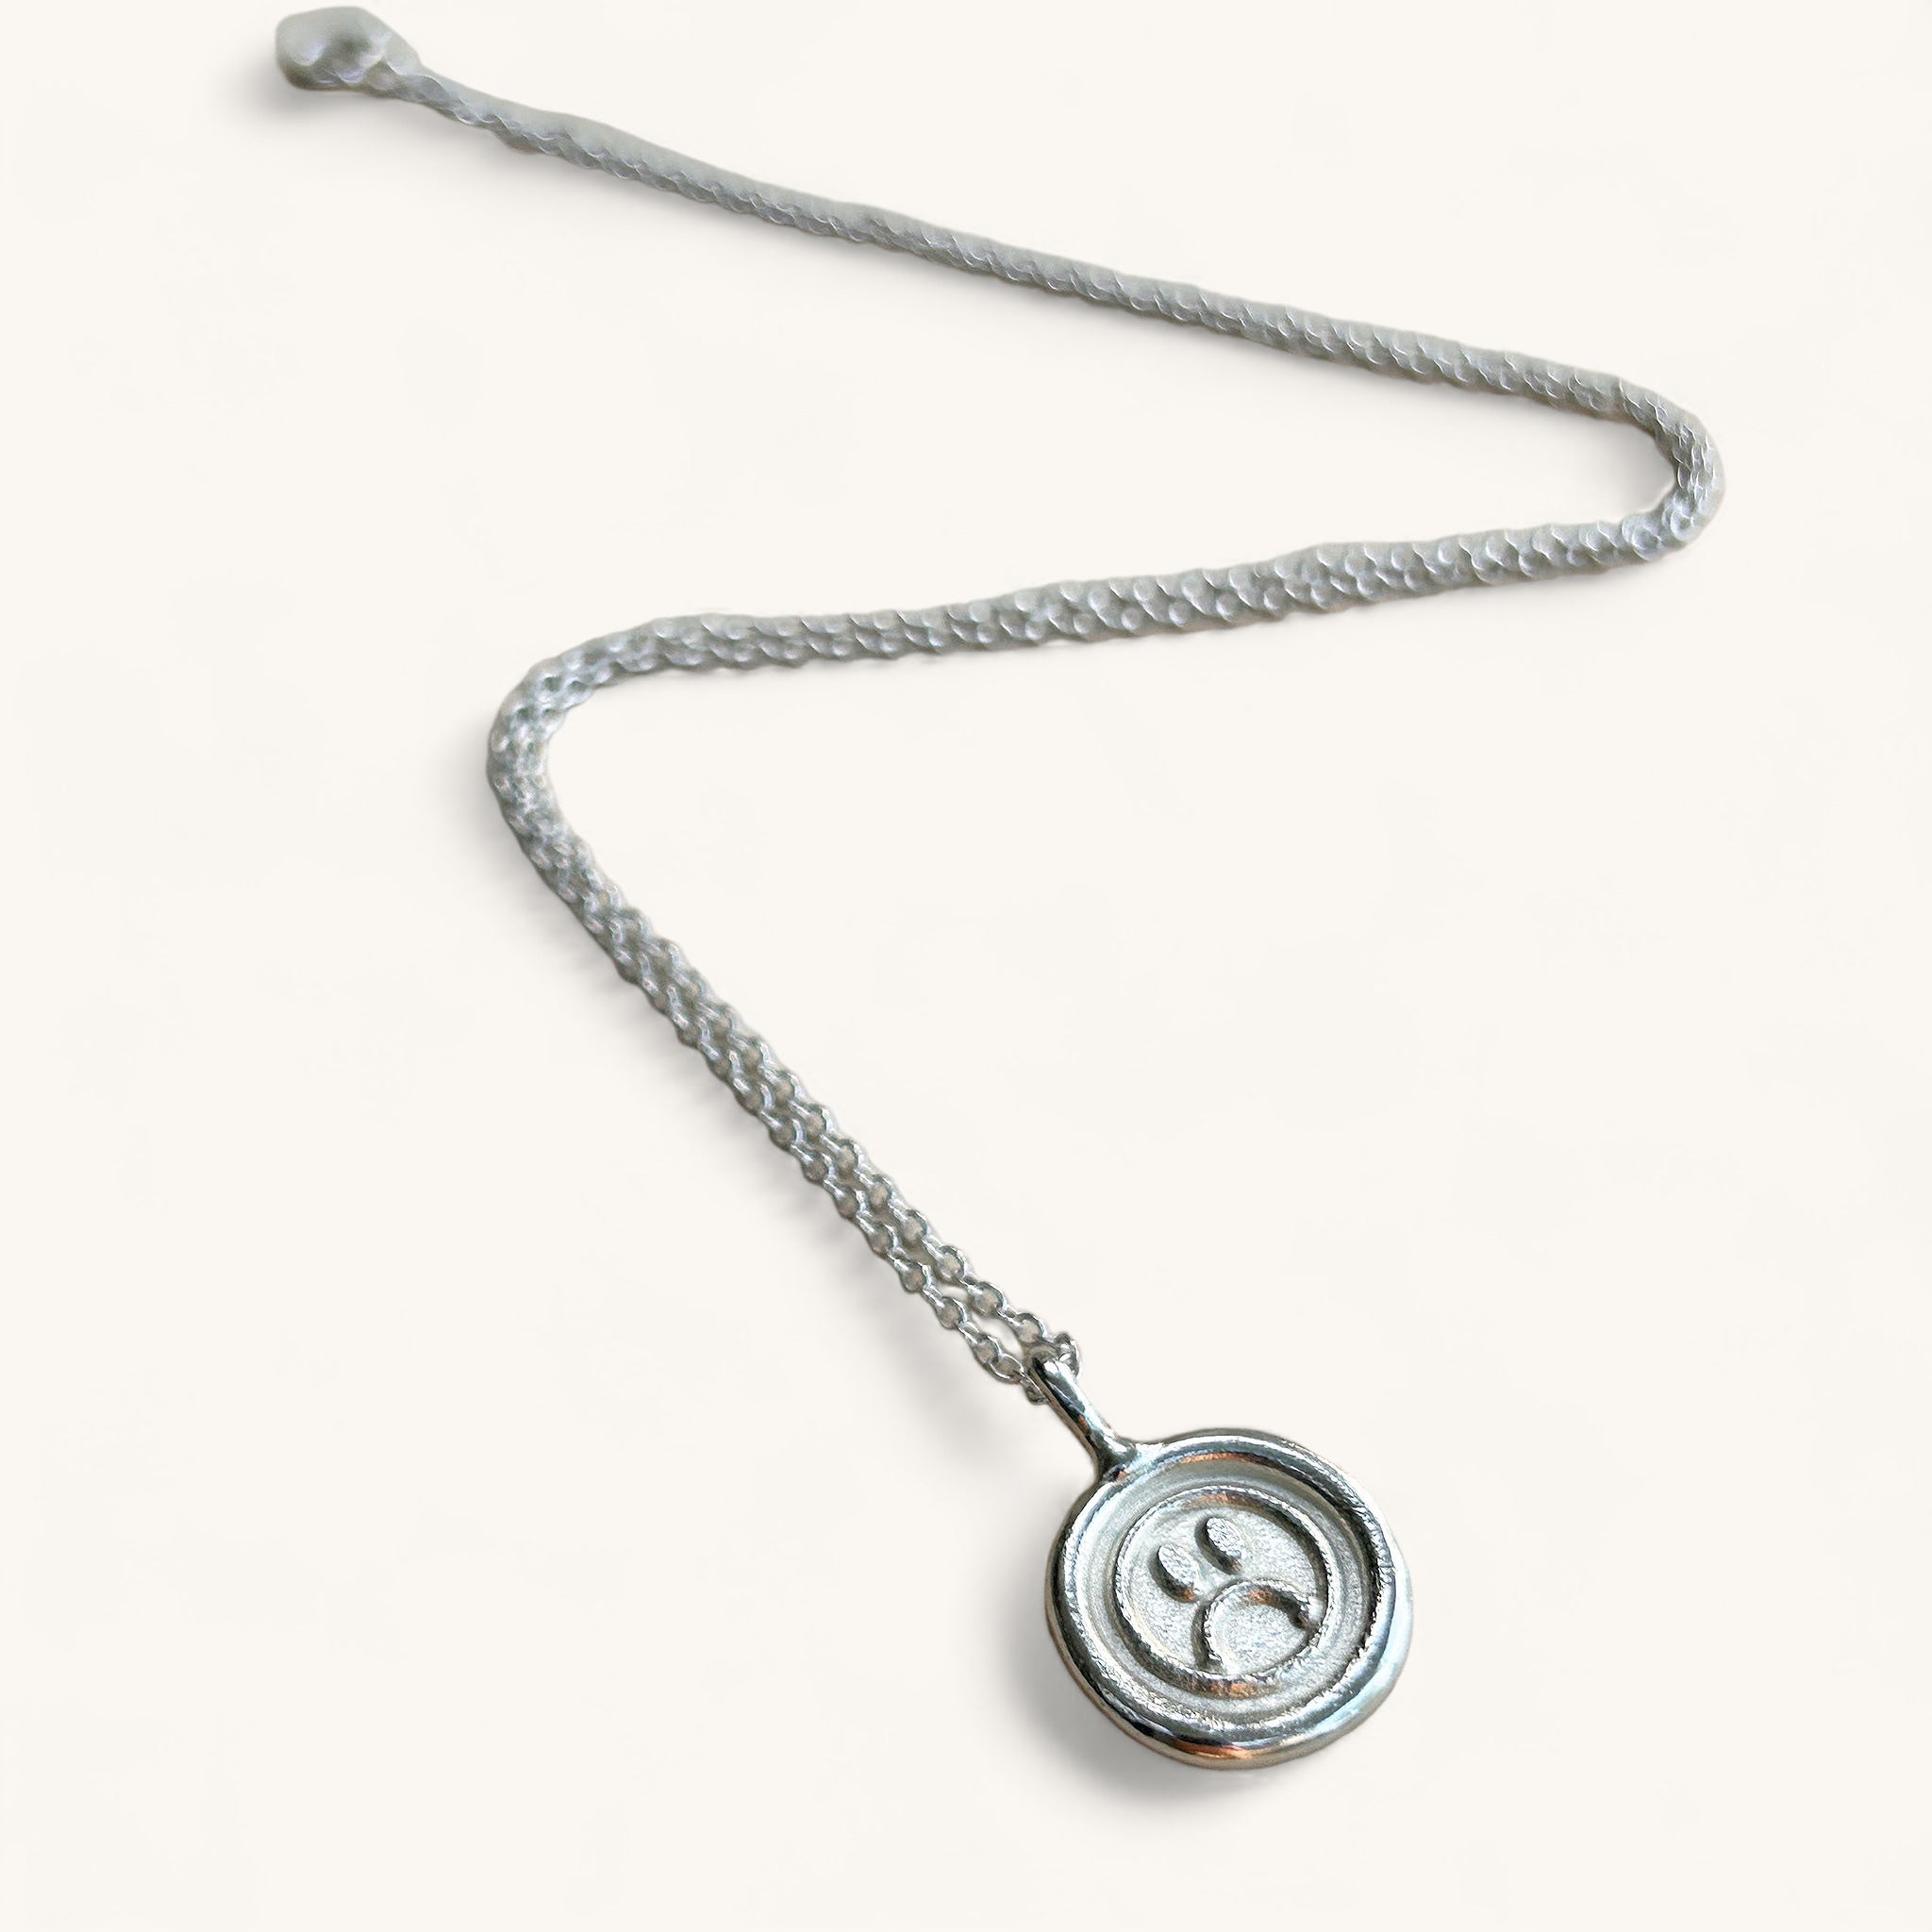 Jennifer Loiselle sad face pendant in recycled metals